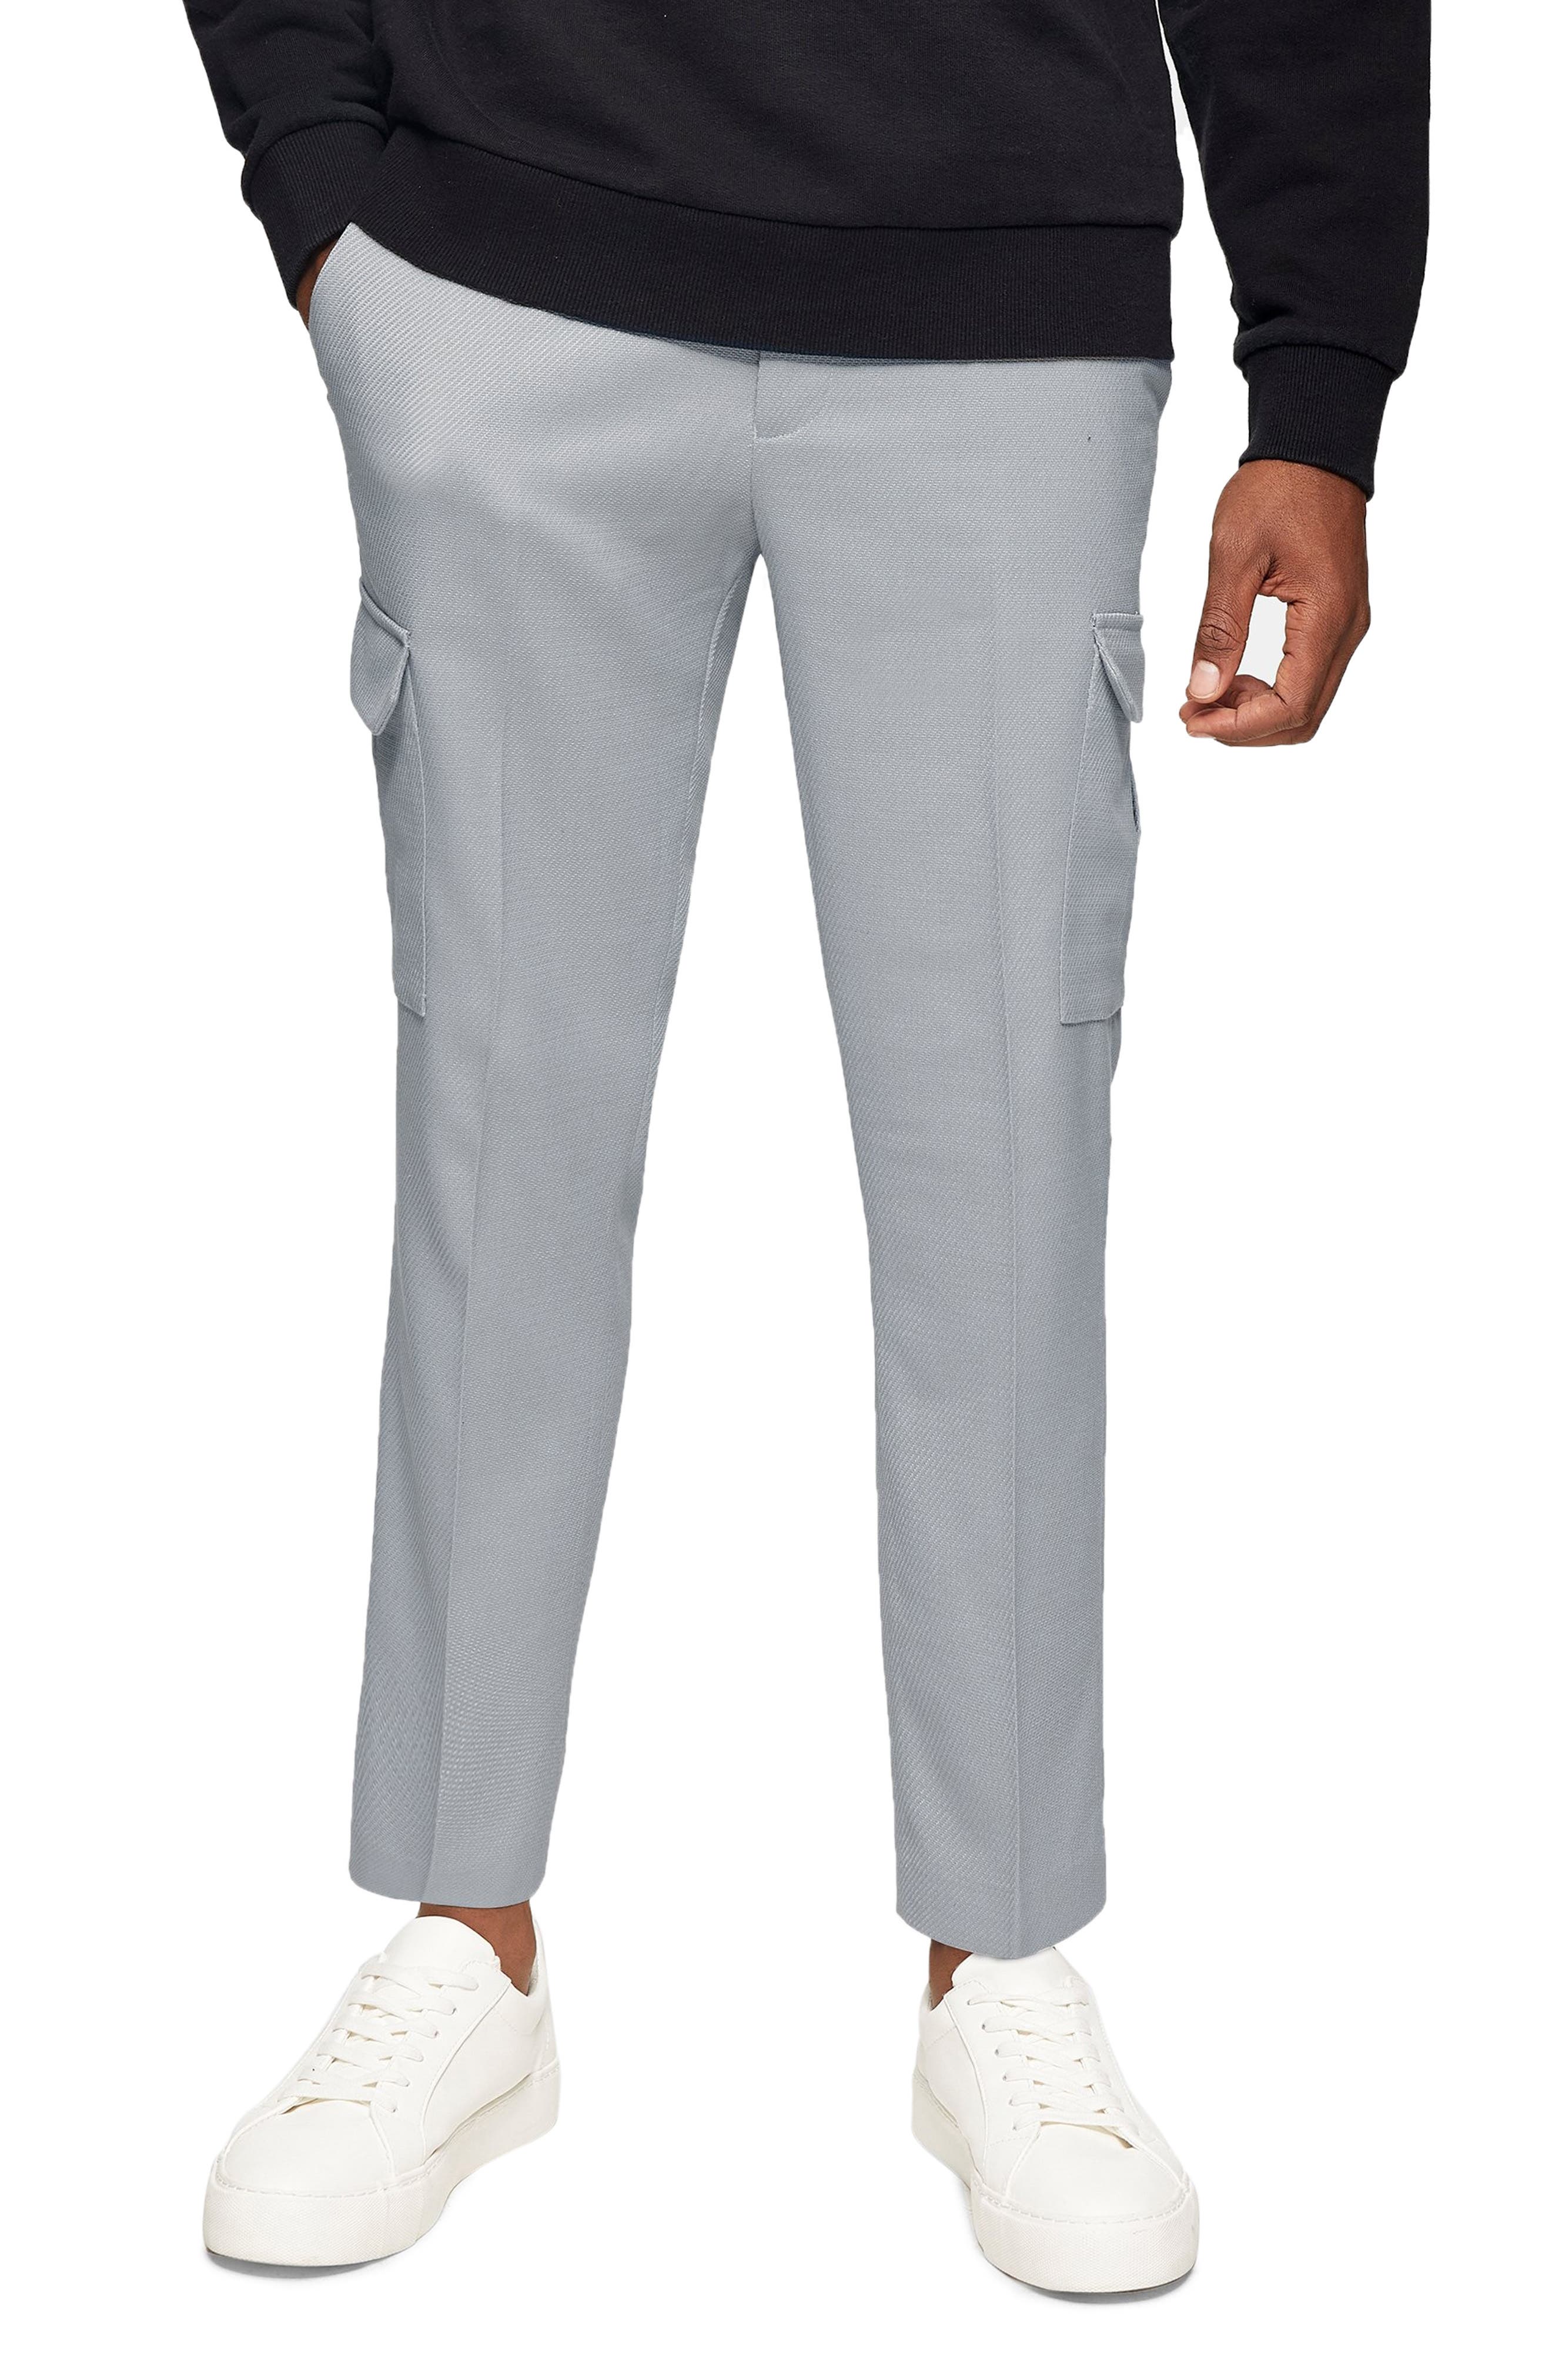 next mens casual trousers